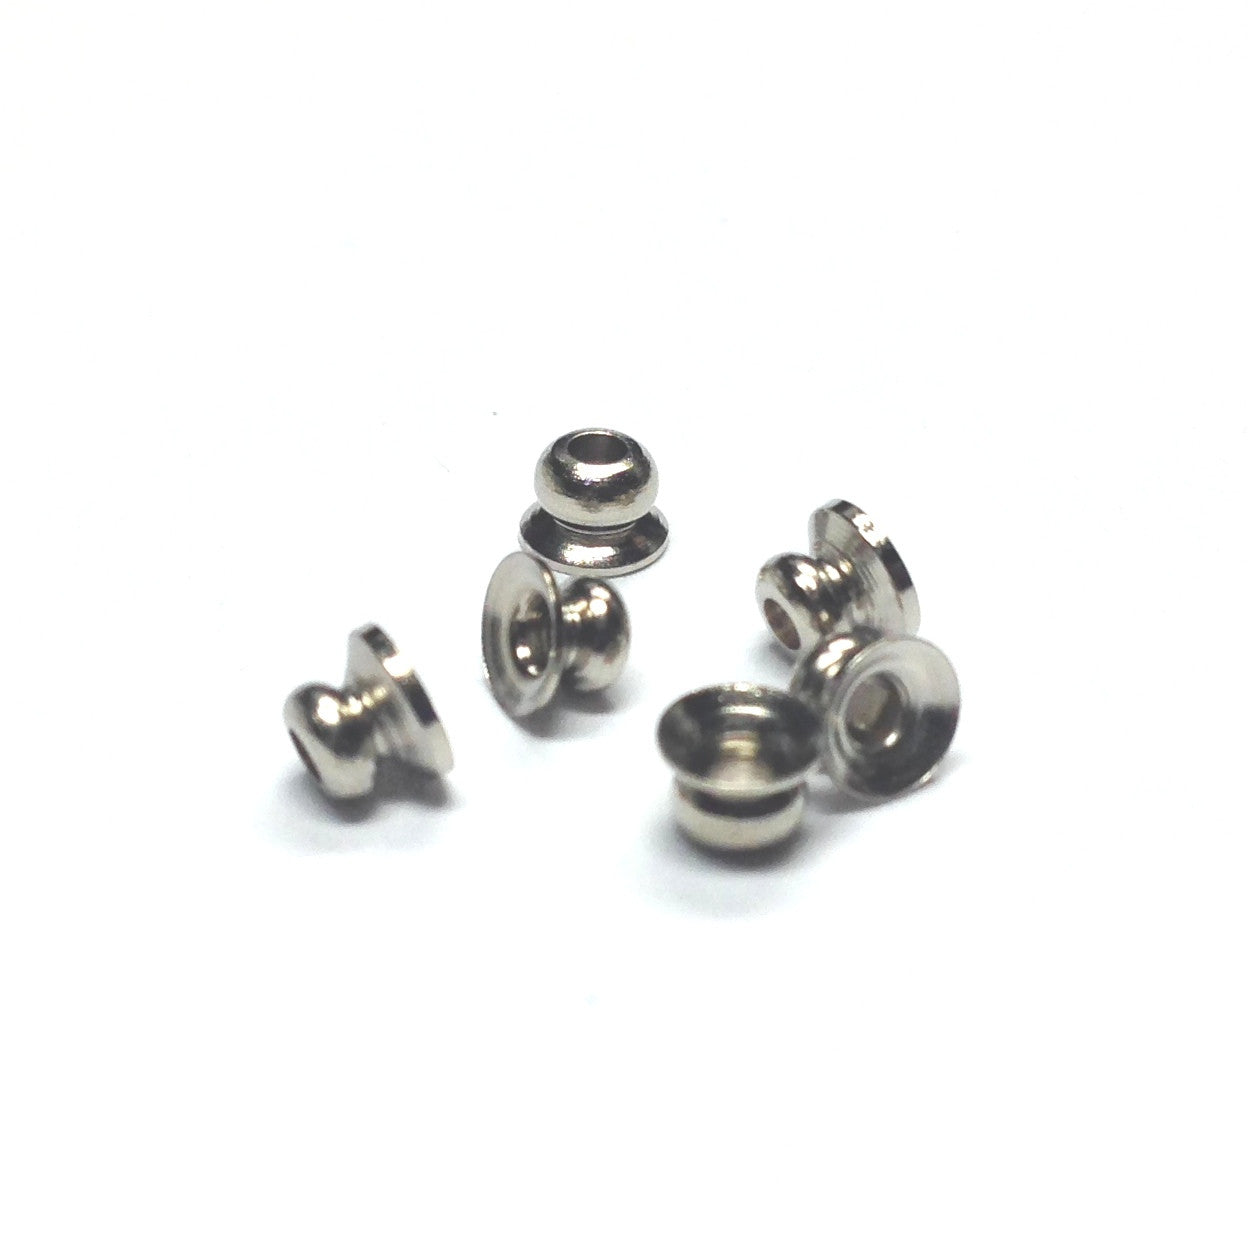 3MM Nickel Ball With 4MM Bead Cap (144 pieces)